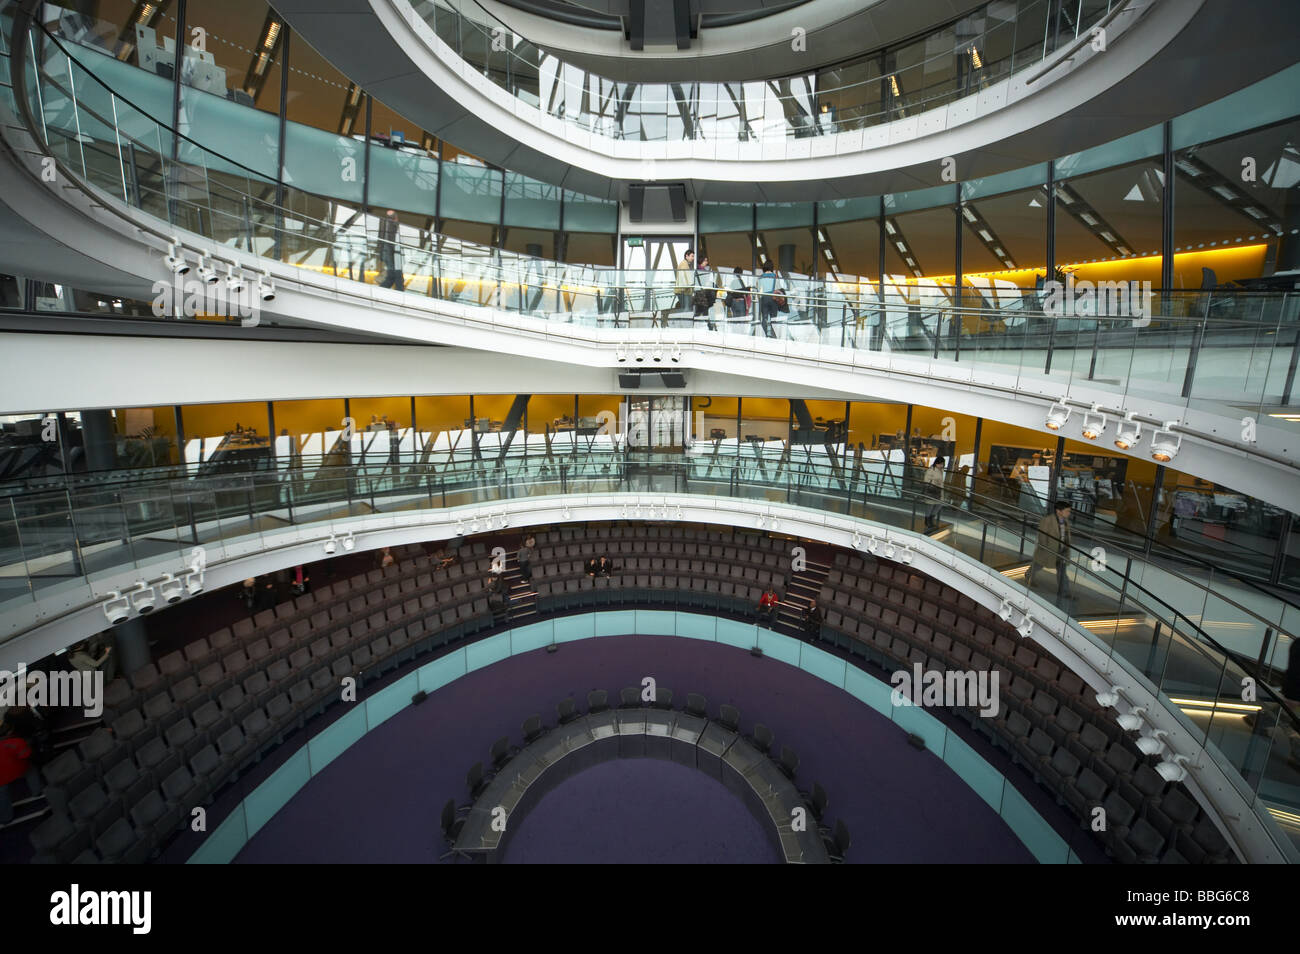 Interior atrium & Spiral staircase of GLA City Hall Mayors office Greater London Authority London England UK architecture Stock Photo